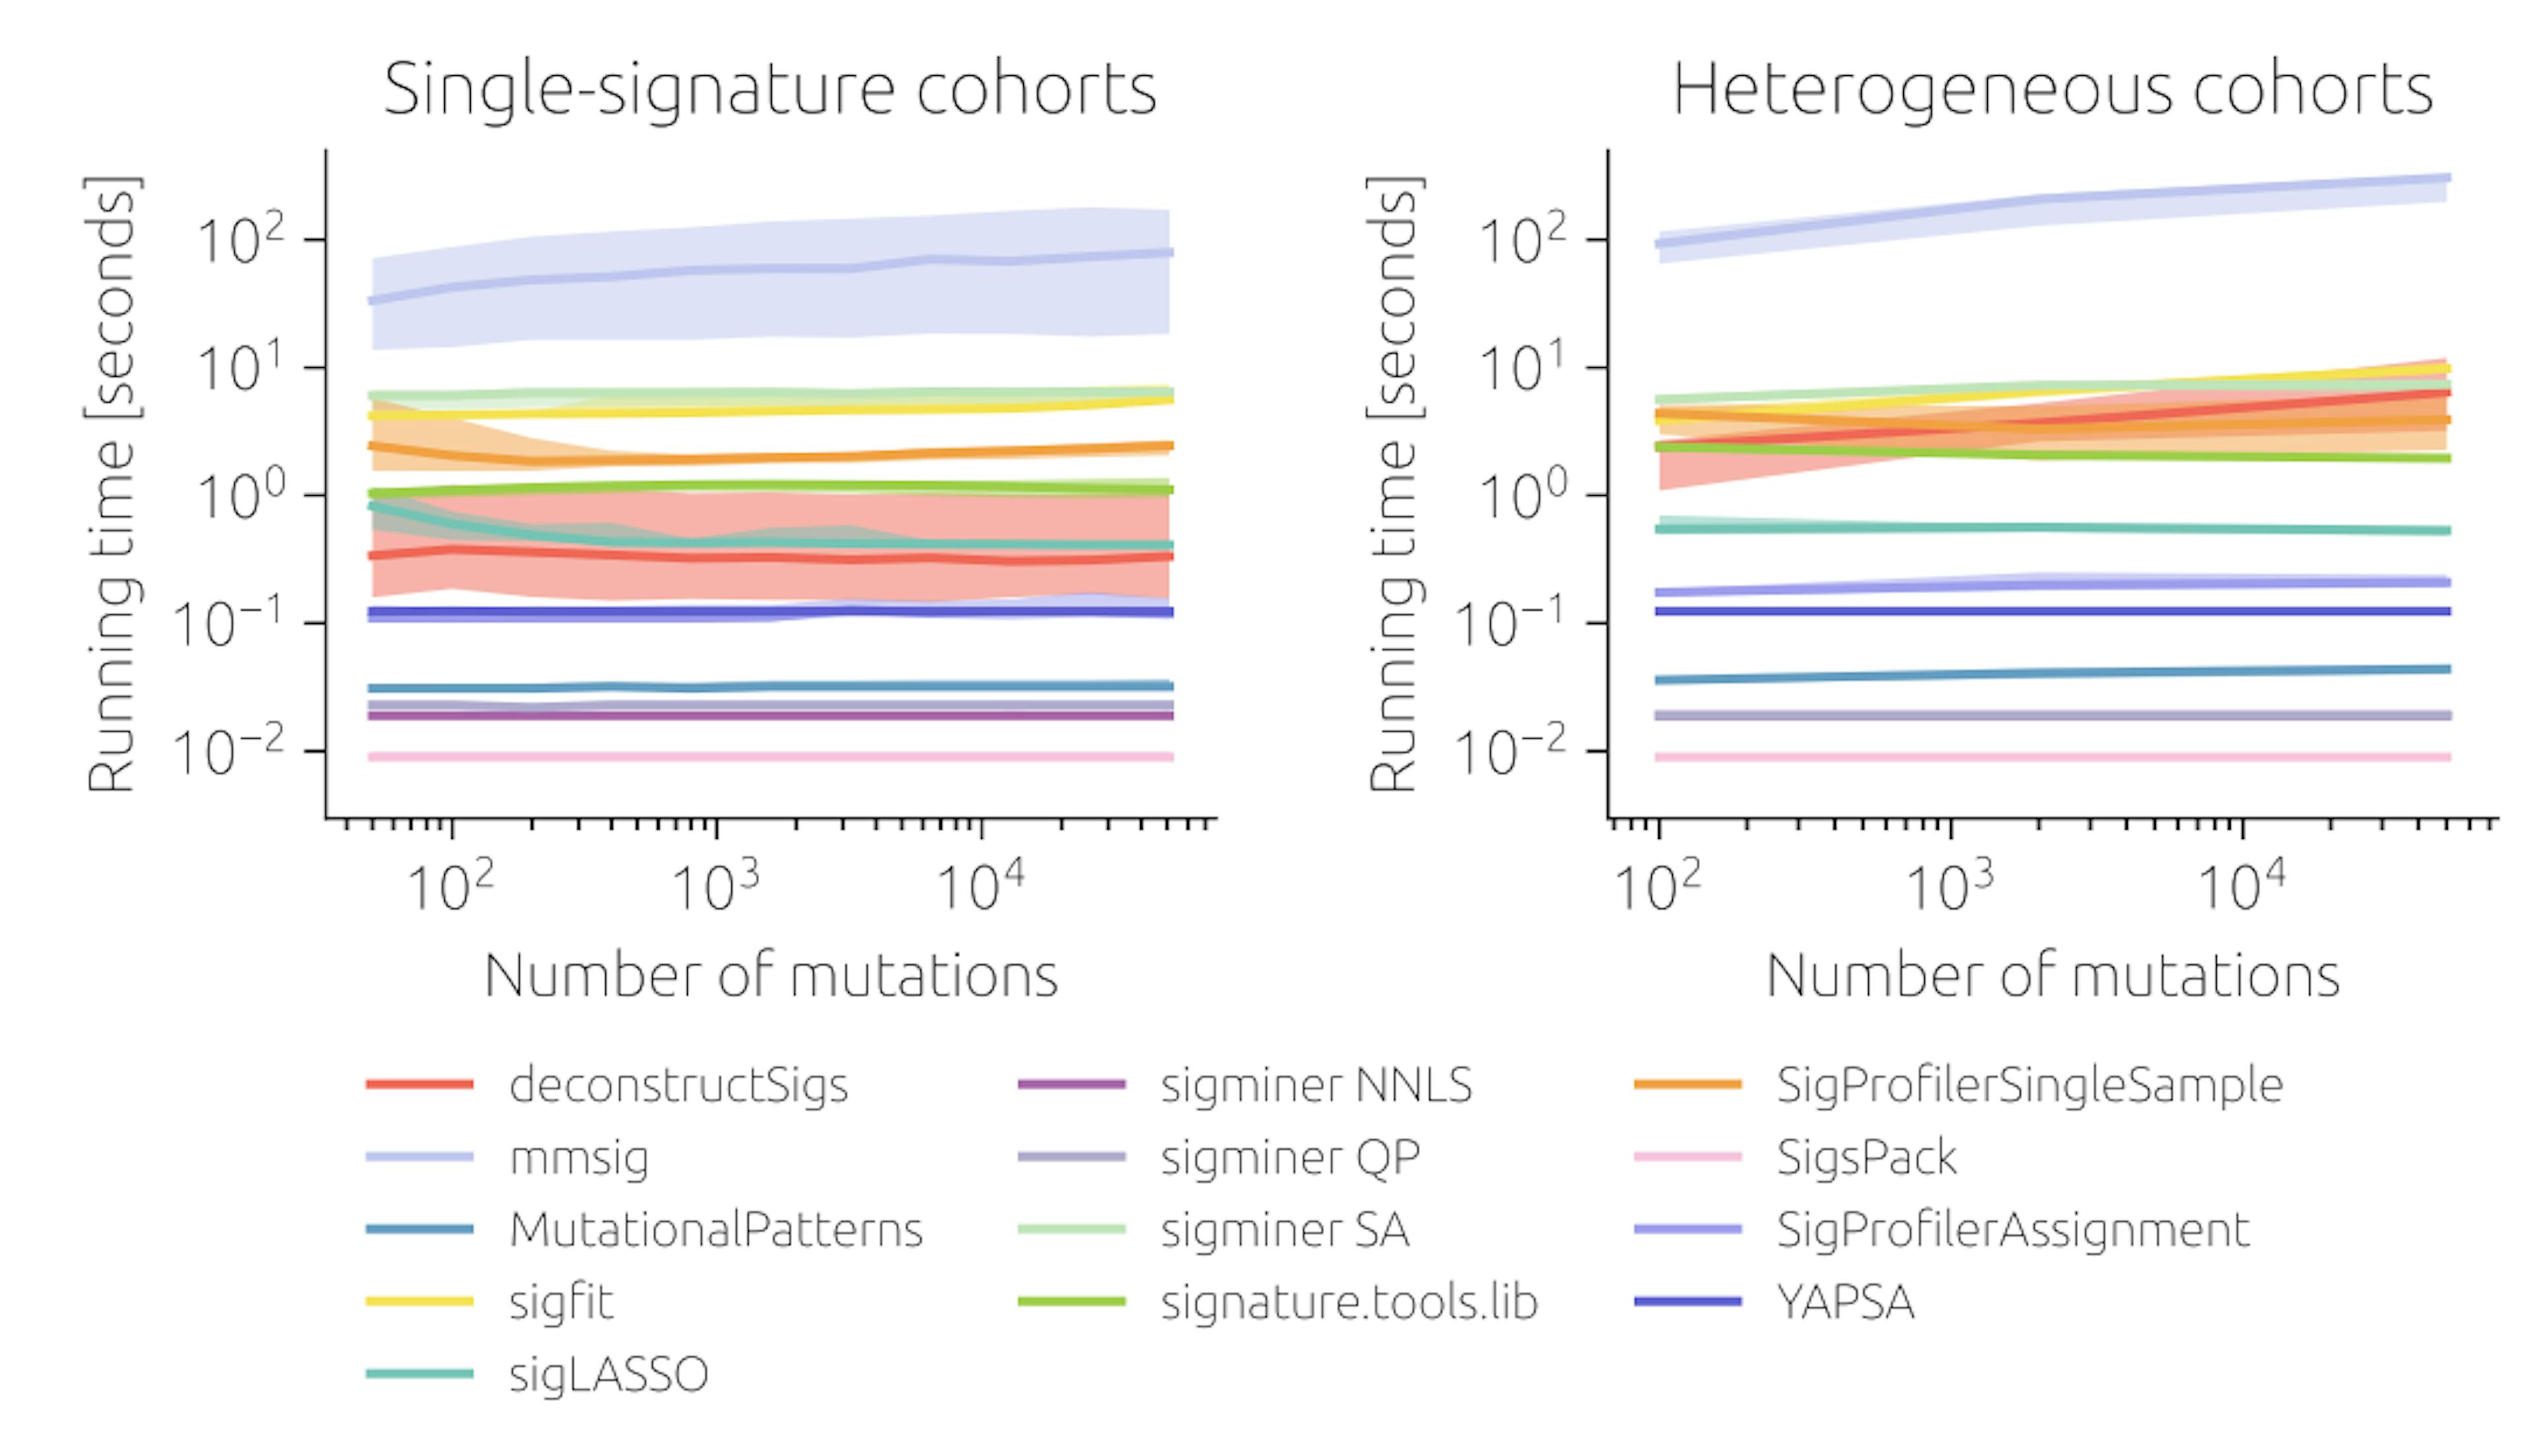 Supplementary Figure 5: The average running times (per sample) in single-signature cohorts (left) and heterogeneous cohorts (right) for all evaluated tools. In the right panel, sigminer QP and sigminer NNLS overlap. SigsPack and mmsig are the fastest and slowest tool in both cases; the ratios between their running times are 6,500 and 22,500 for single-signature and heterogeneous cohorts, respectively. deconstructSigs is more than 10 times slower in heterogeneous cohorts. Simulations were run on Intel CPUs i5-6500 @ 3.20GHz.